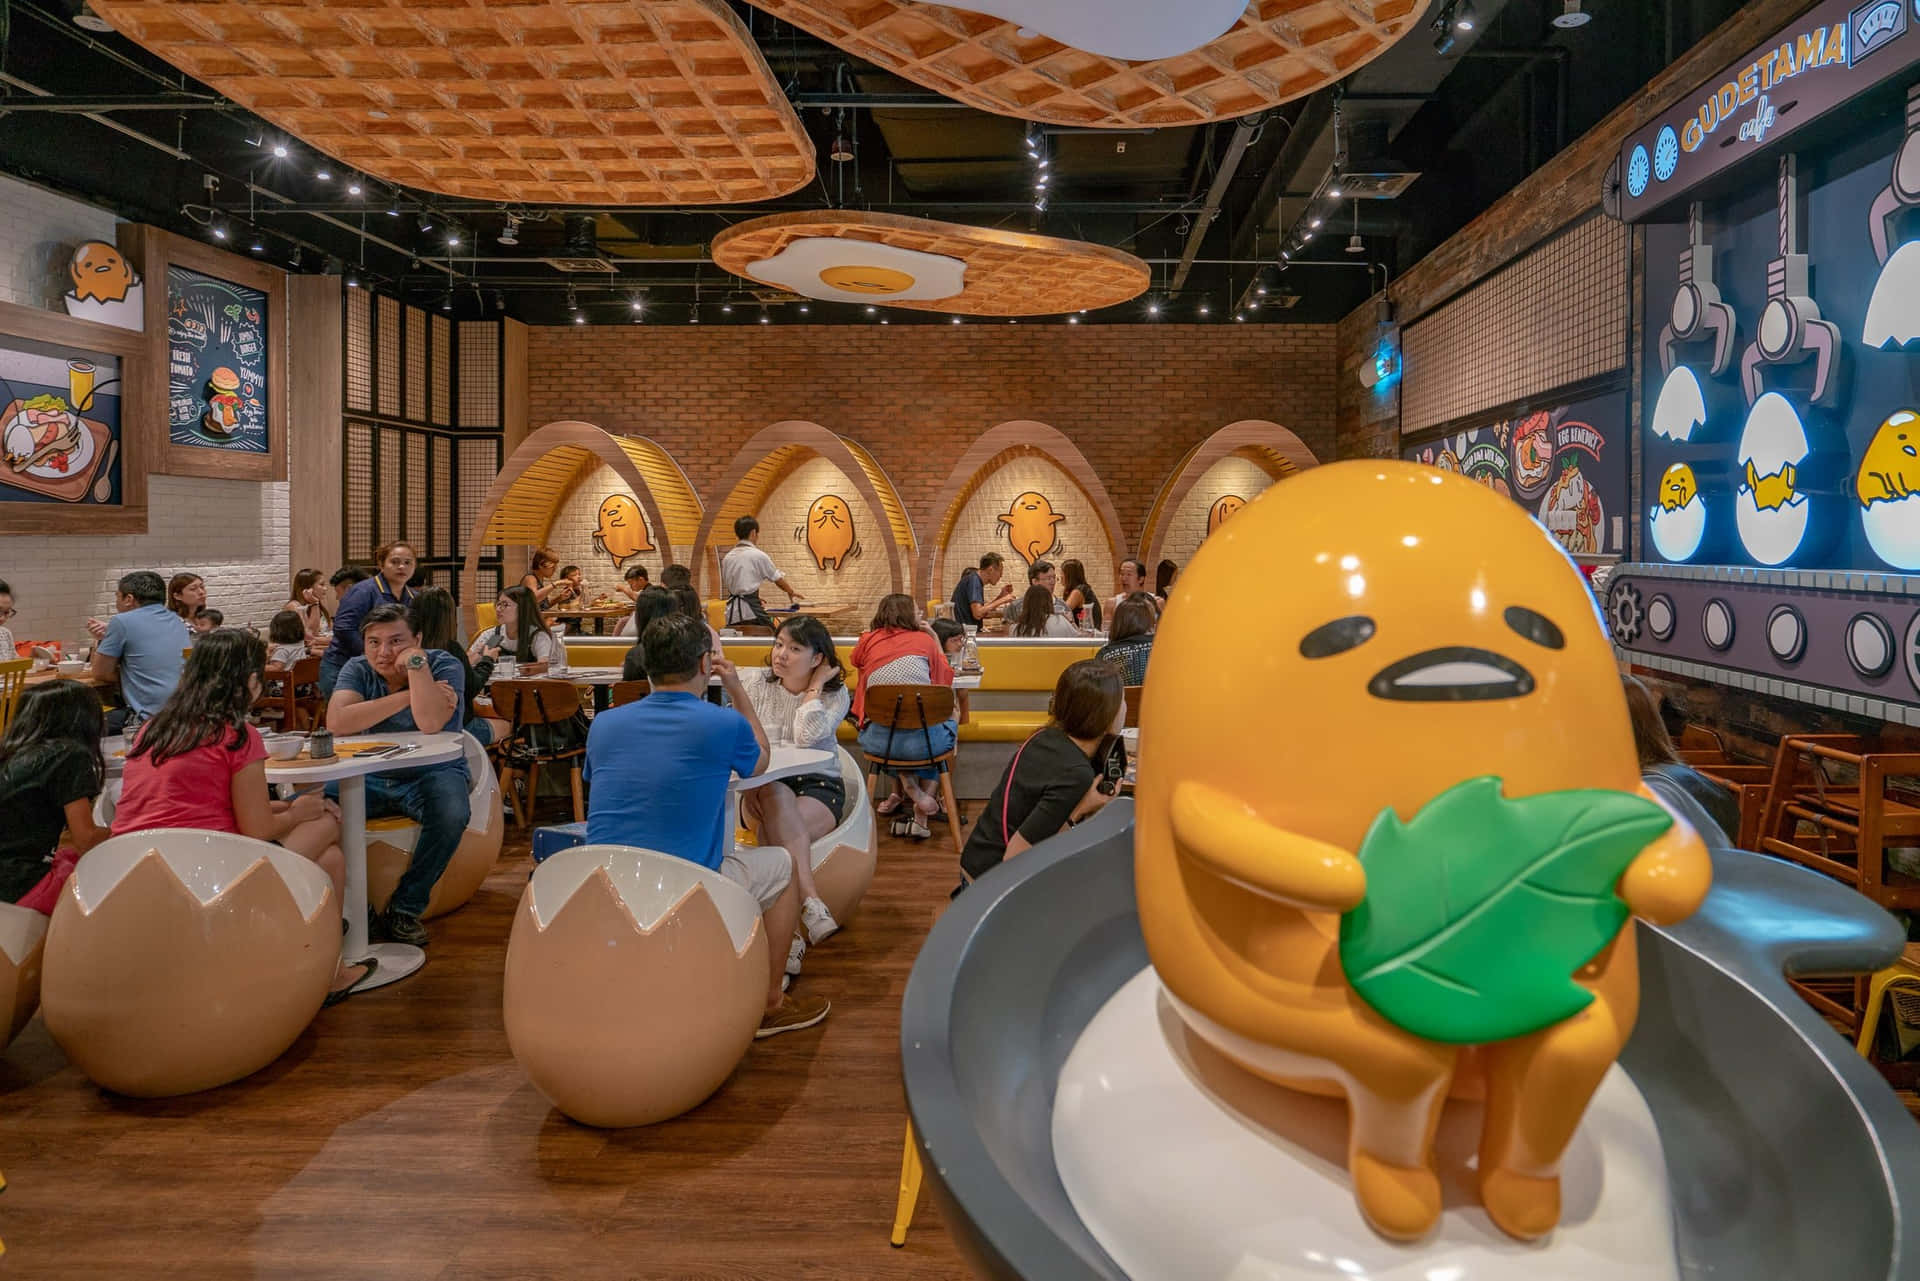 Last chance to get Gudetama before he disappears!